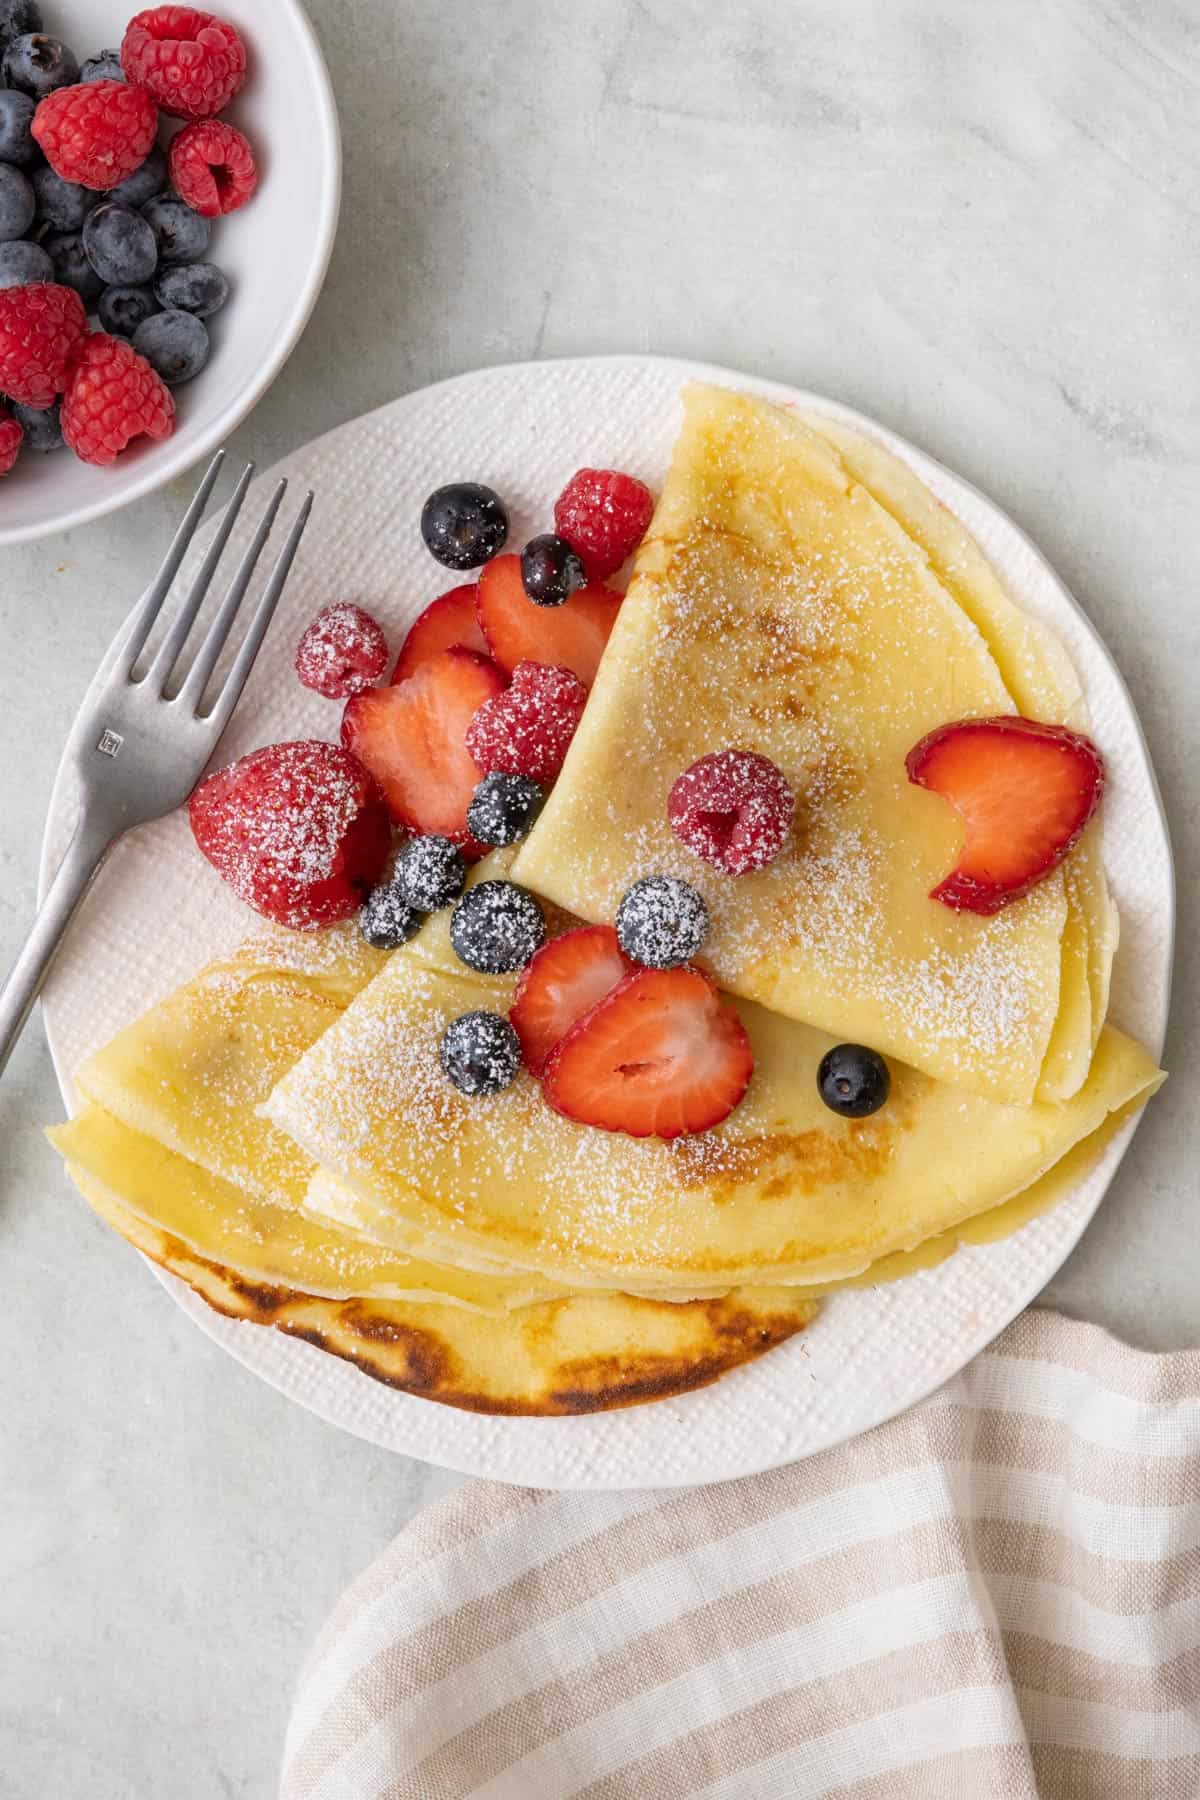 Three delicate crepes folded into trianlges topped with berries and powdered sugar on a small plate with a fork and more berries nearby.